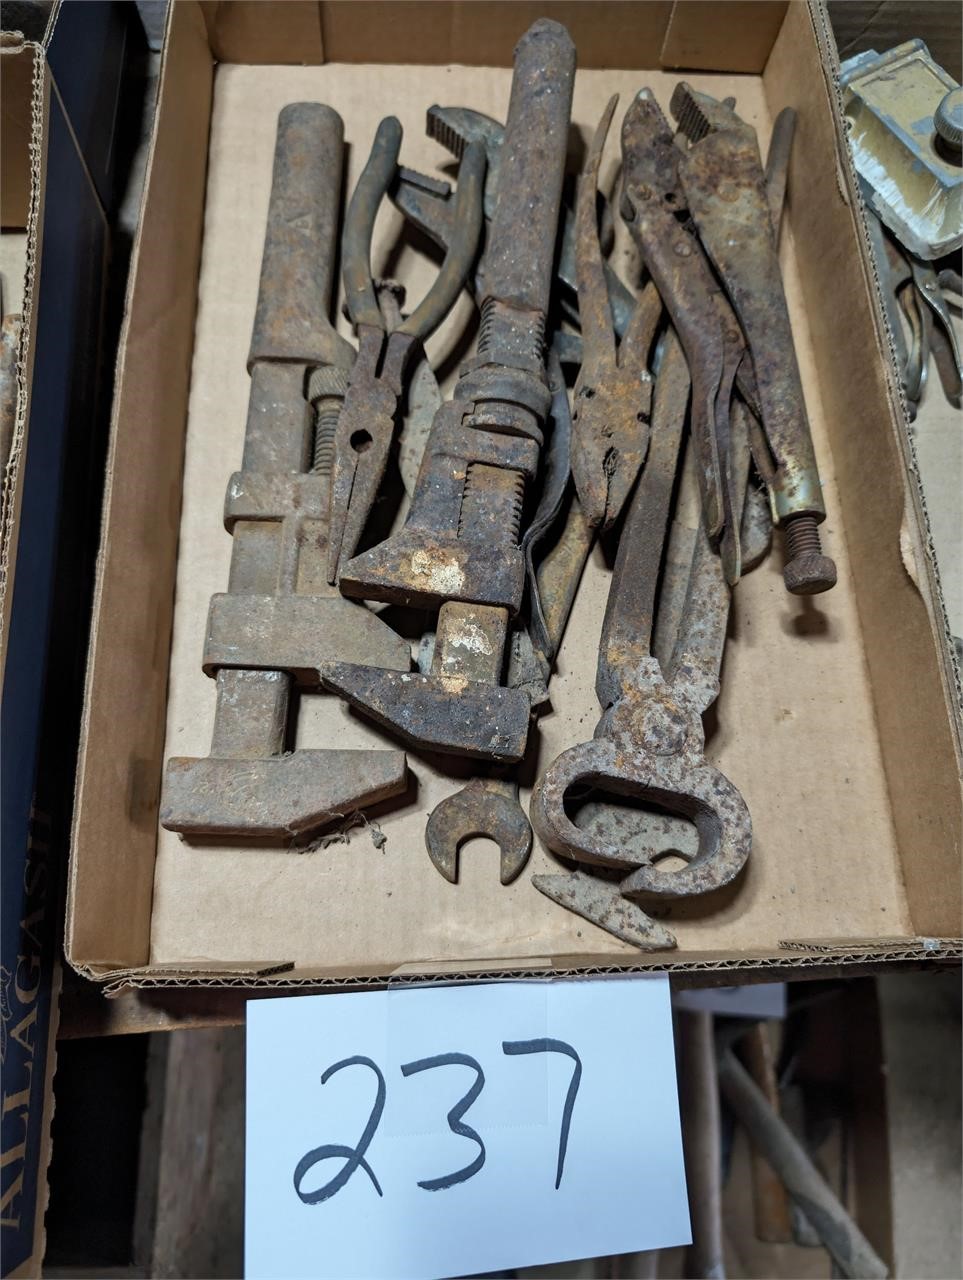 Old Wrenches, Pliers, Tools